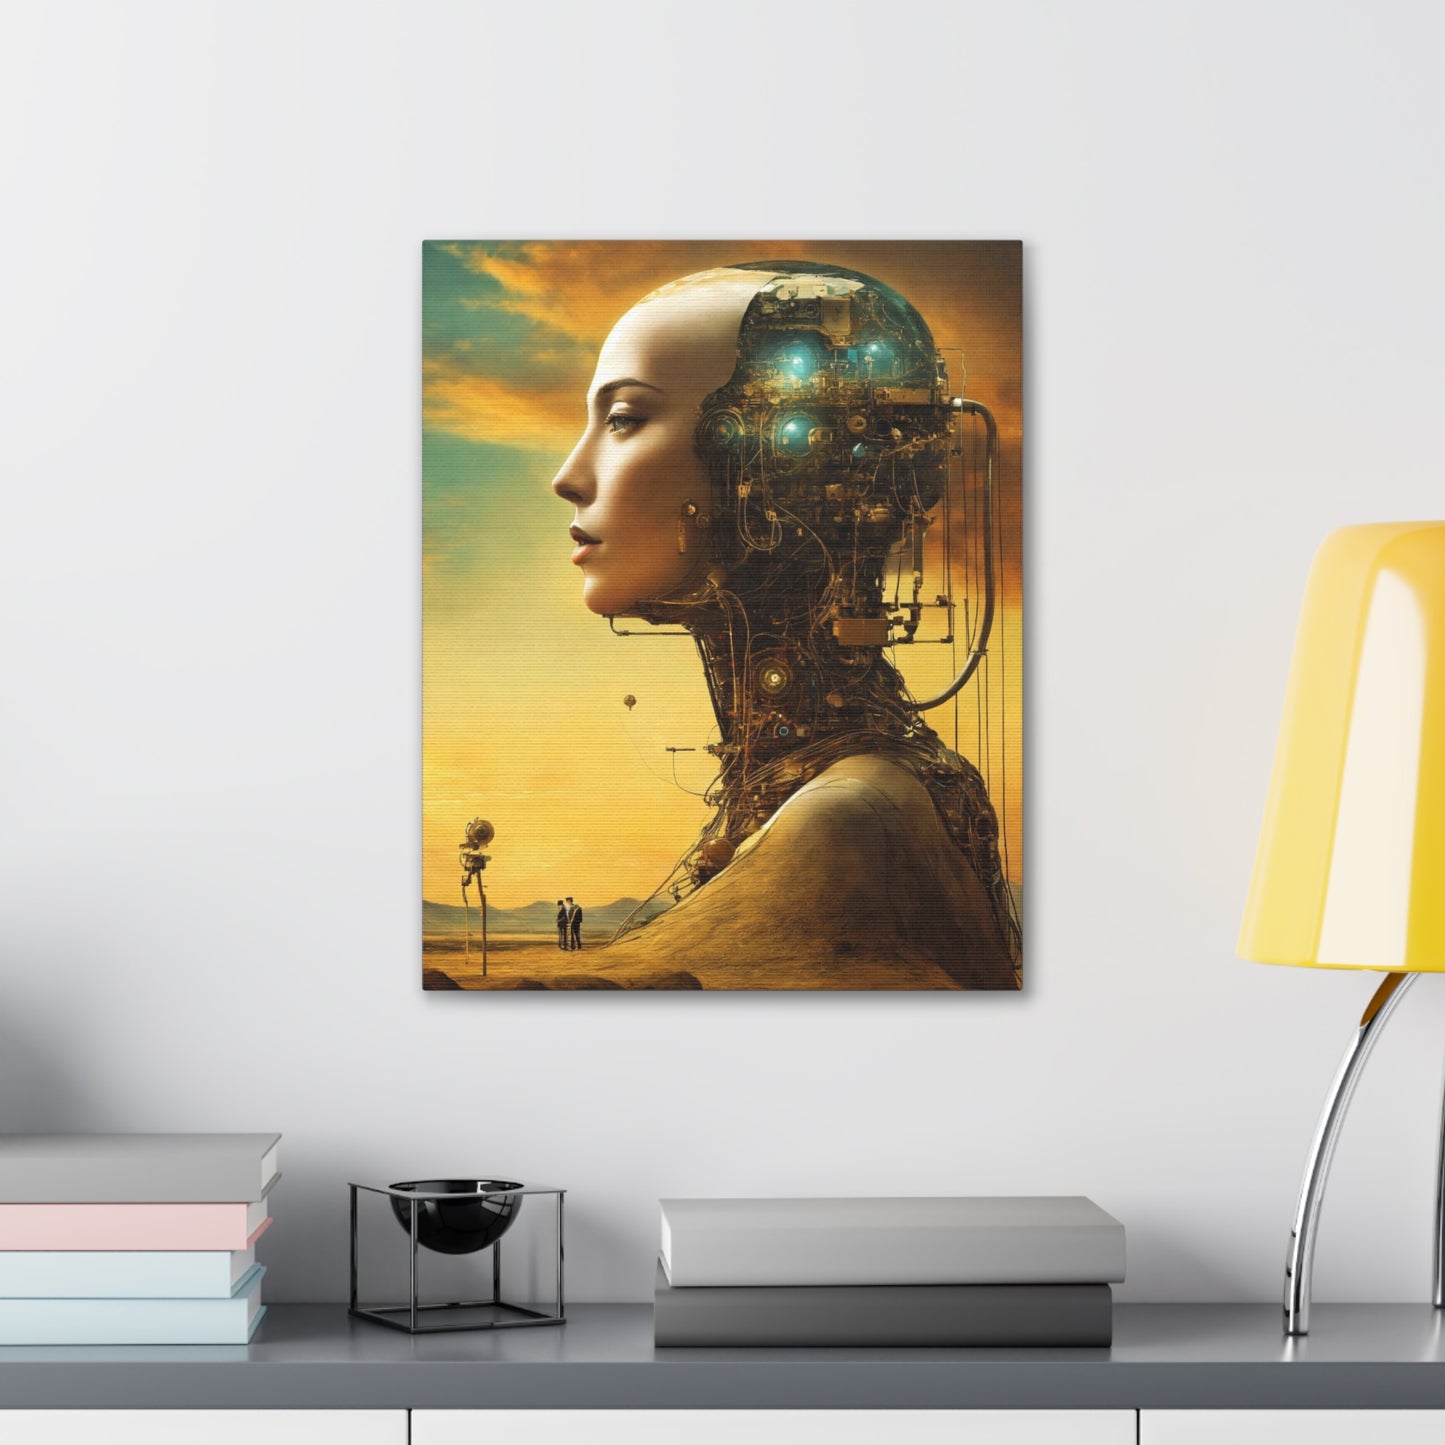 "Synthetic Sphinx: A Surreal Portrait of AI Ascension"